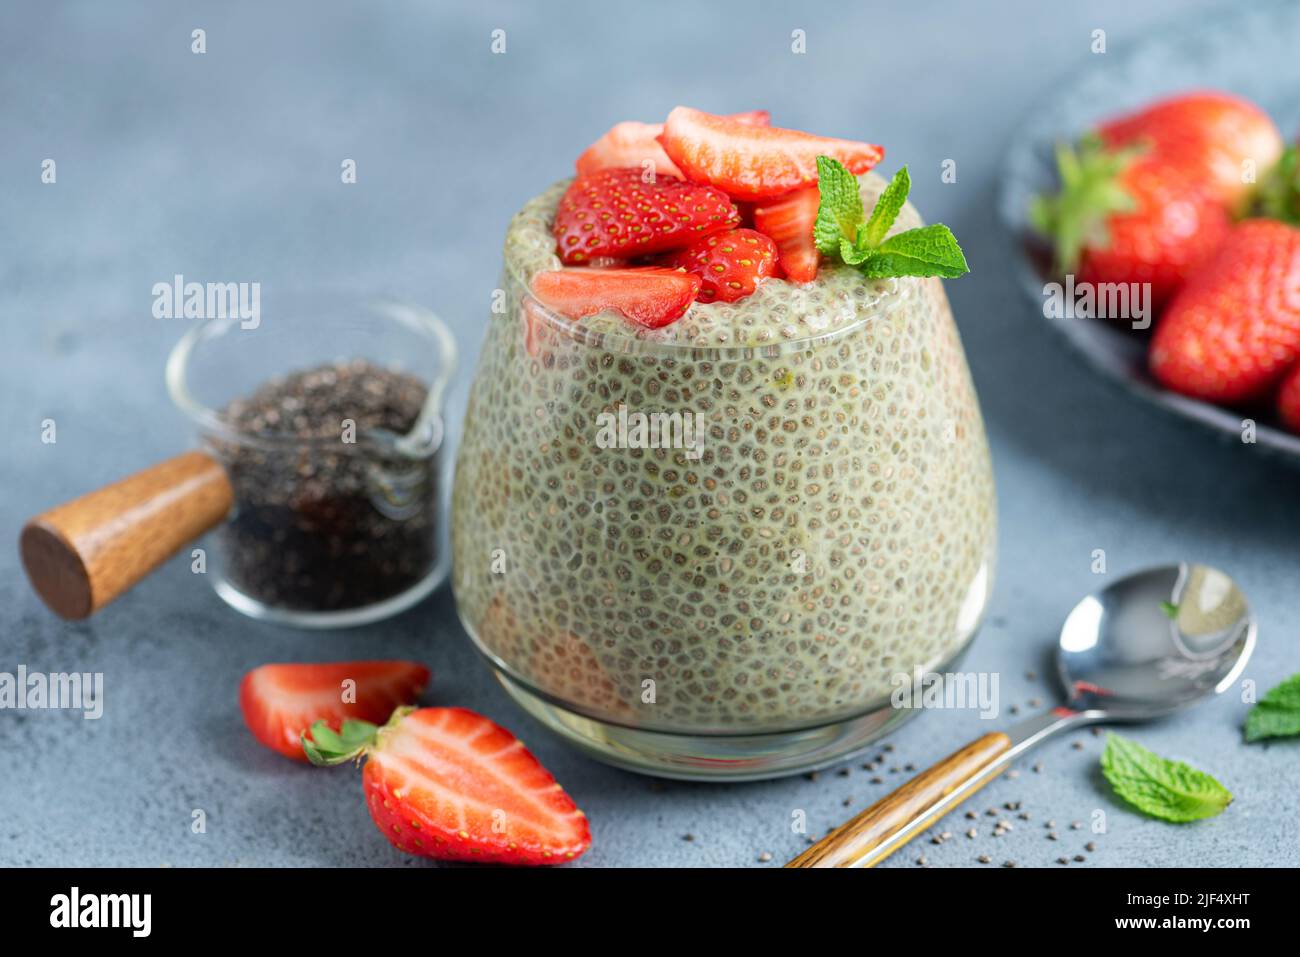 Chia pudding with strawberries in glass jar on blue stone background, closeup view Stock Photo